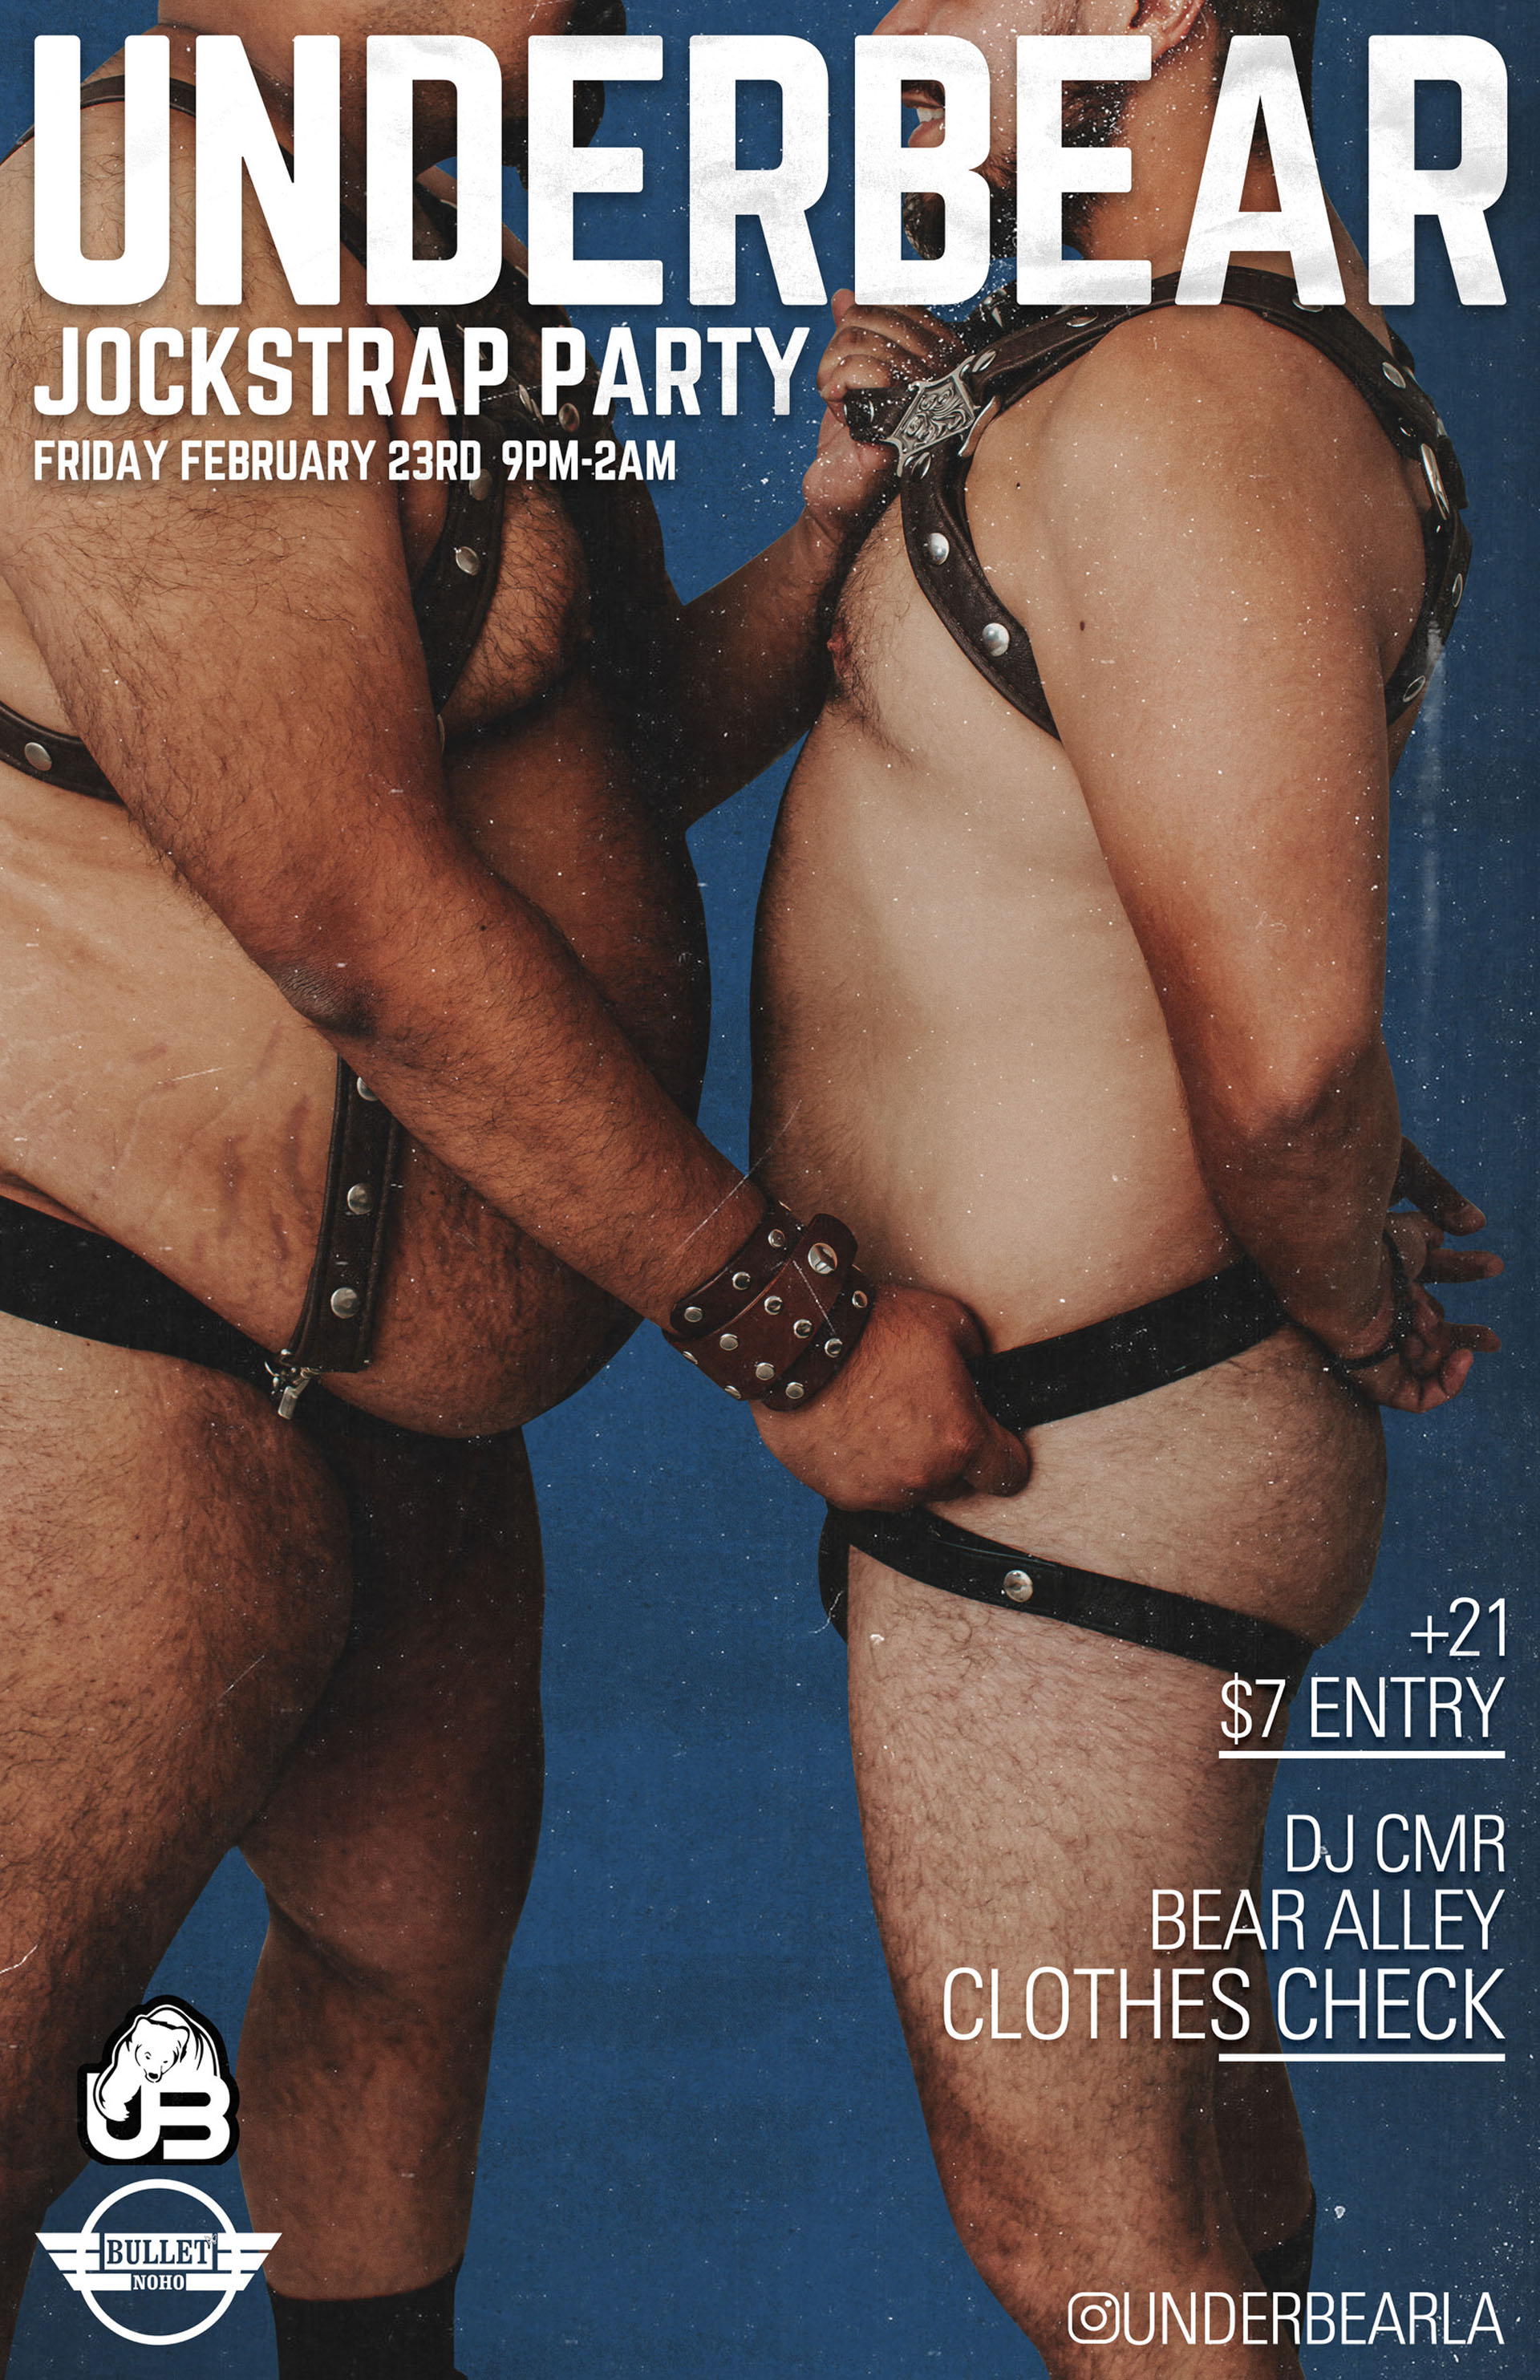 The Bullet Bar and UnderBearParty.com Present UNDERBEAR JOCKSTRAP PARTY with DJ CMR: Friday, 02/23/24 at 9:00 PM! Free Clothes Check! $7 Cover.